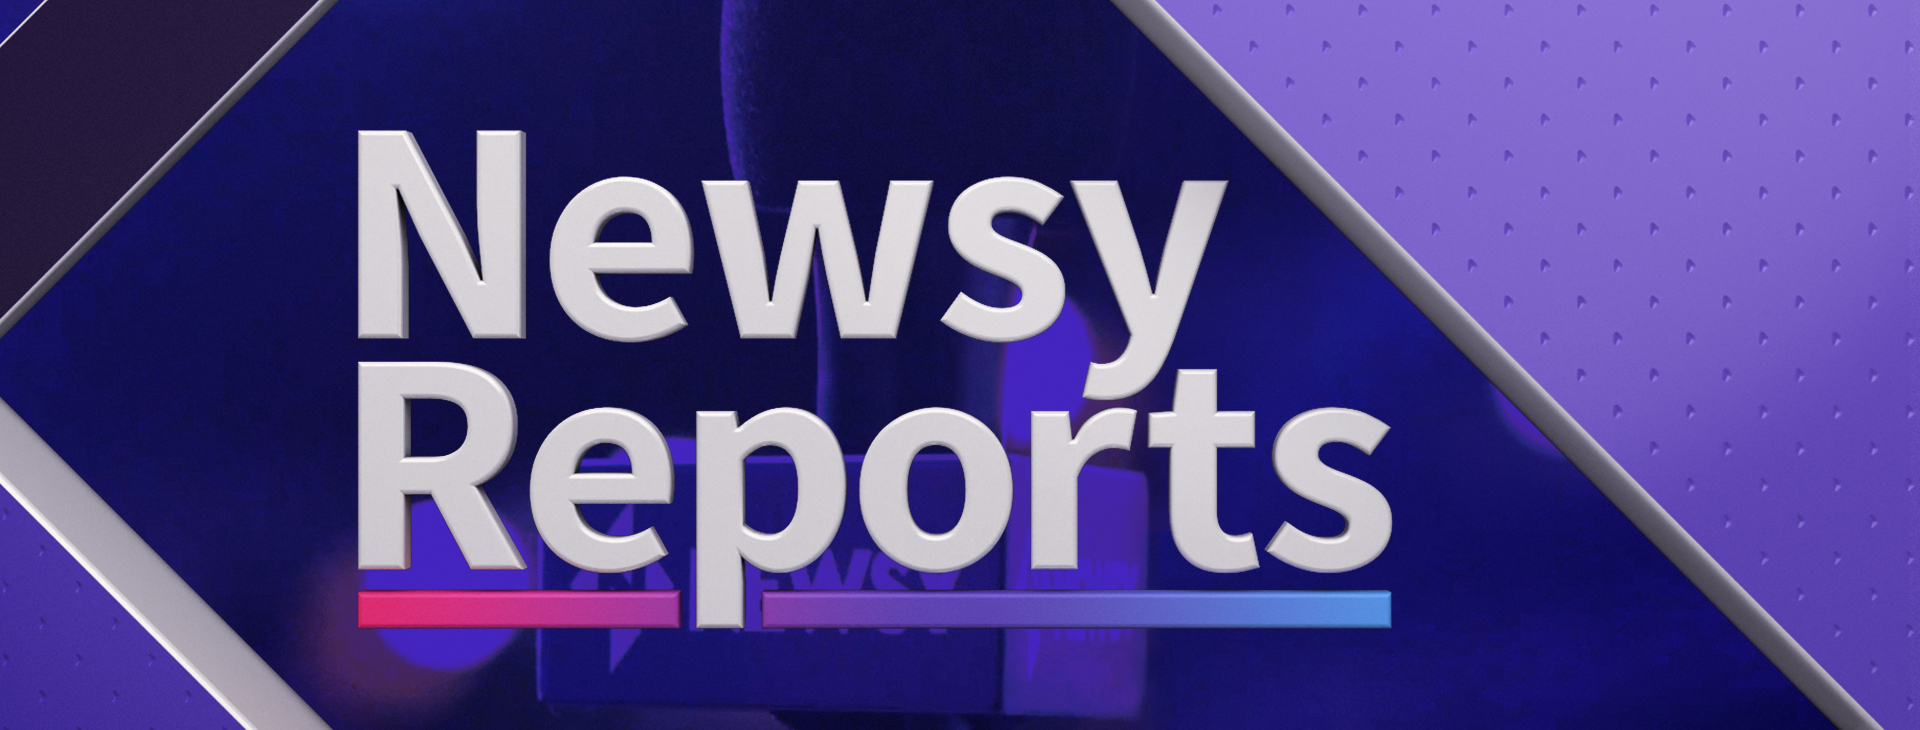 Newsy Reports